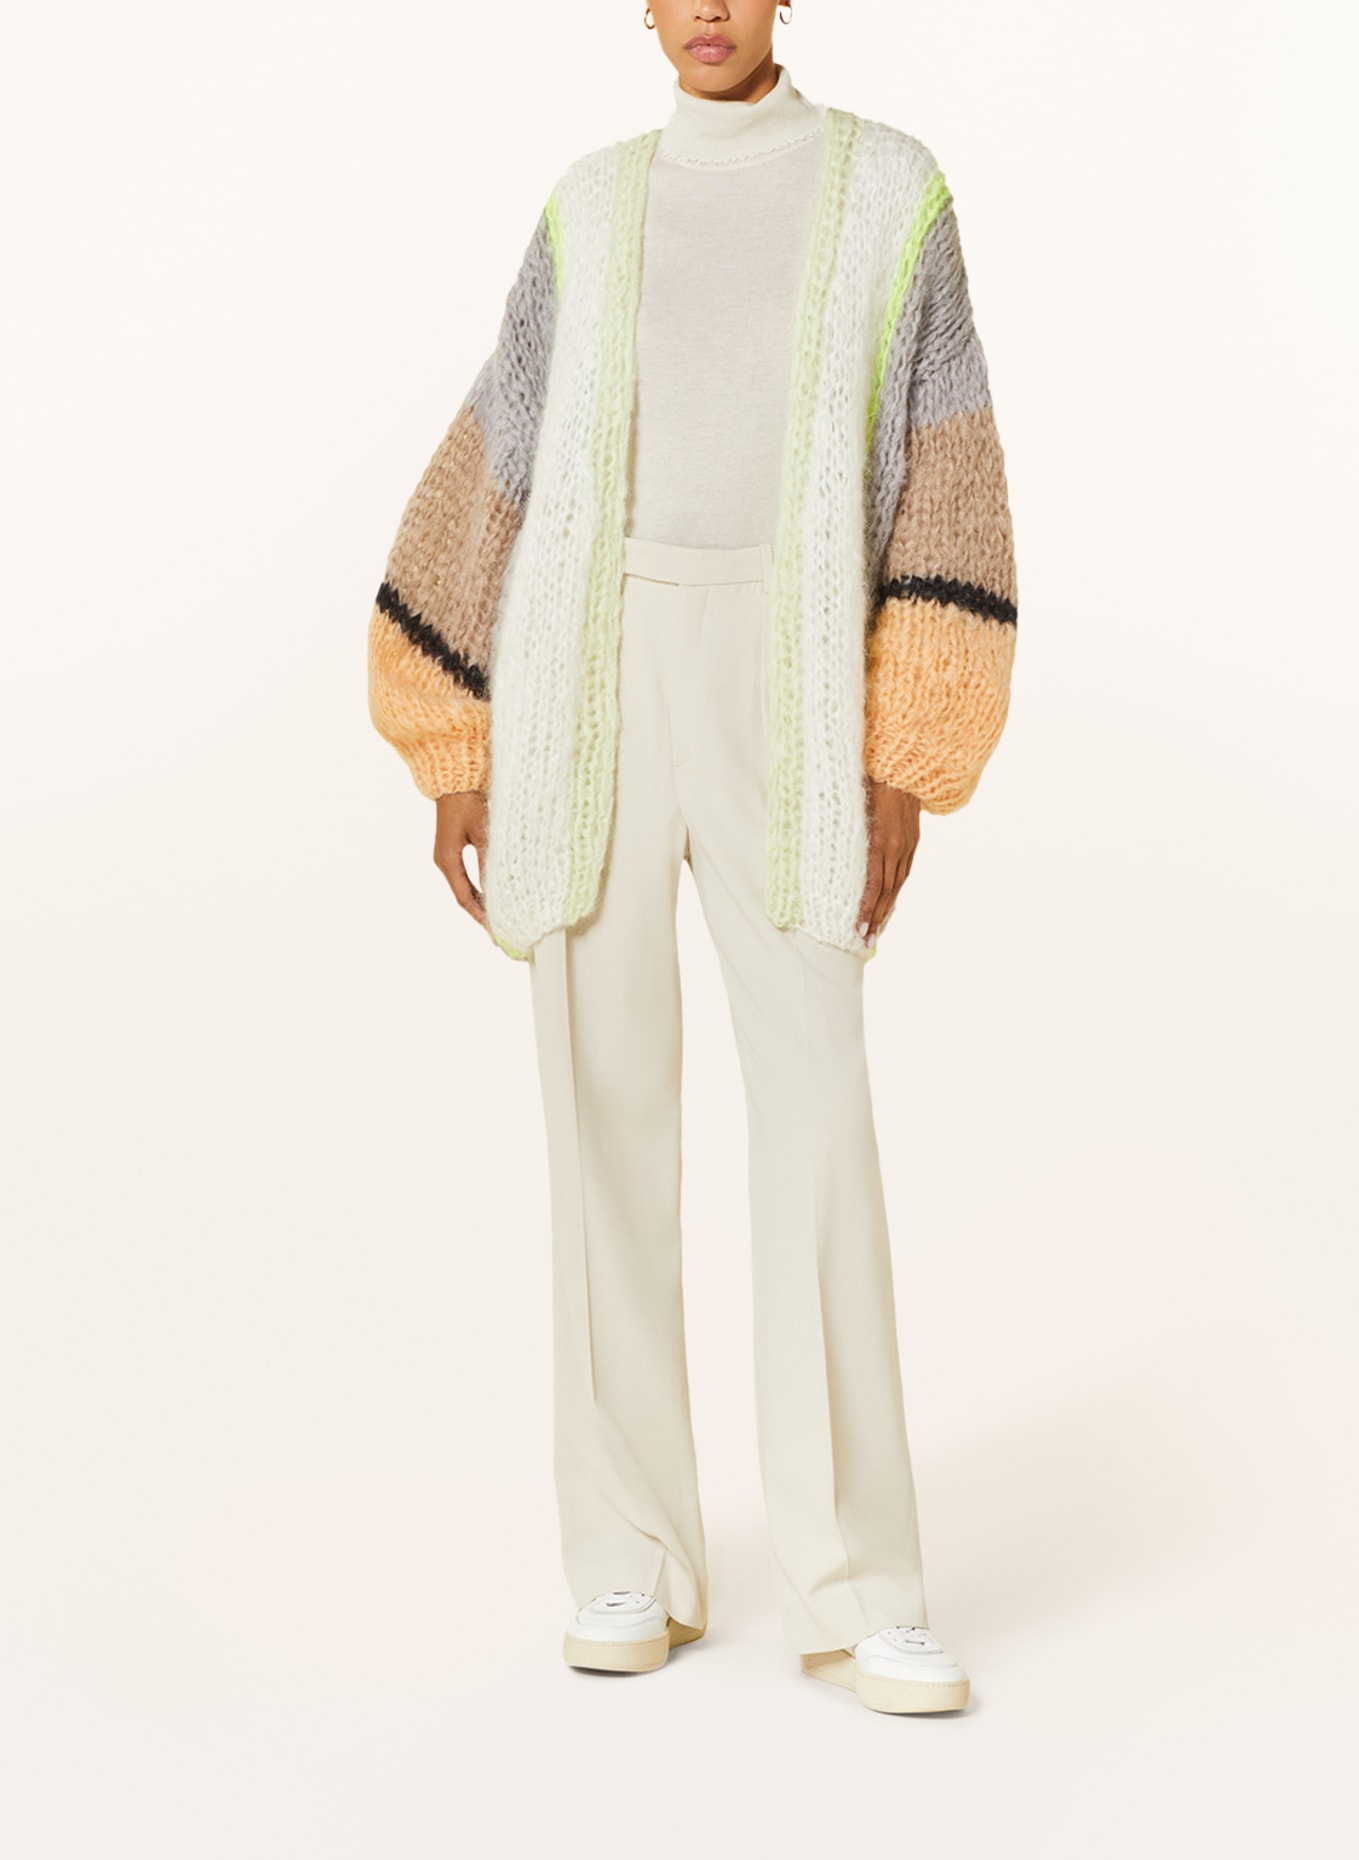 MAIAMI Knit cardigan made of mohair, Color: TAUPE/ WHITE/ NEON YELLOW (Image 2)